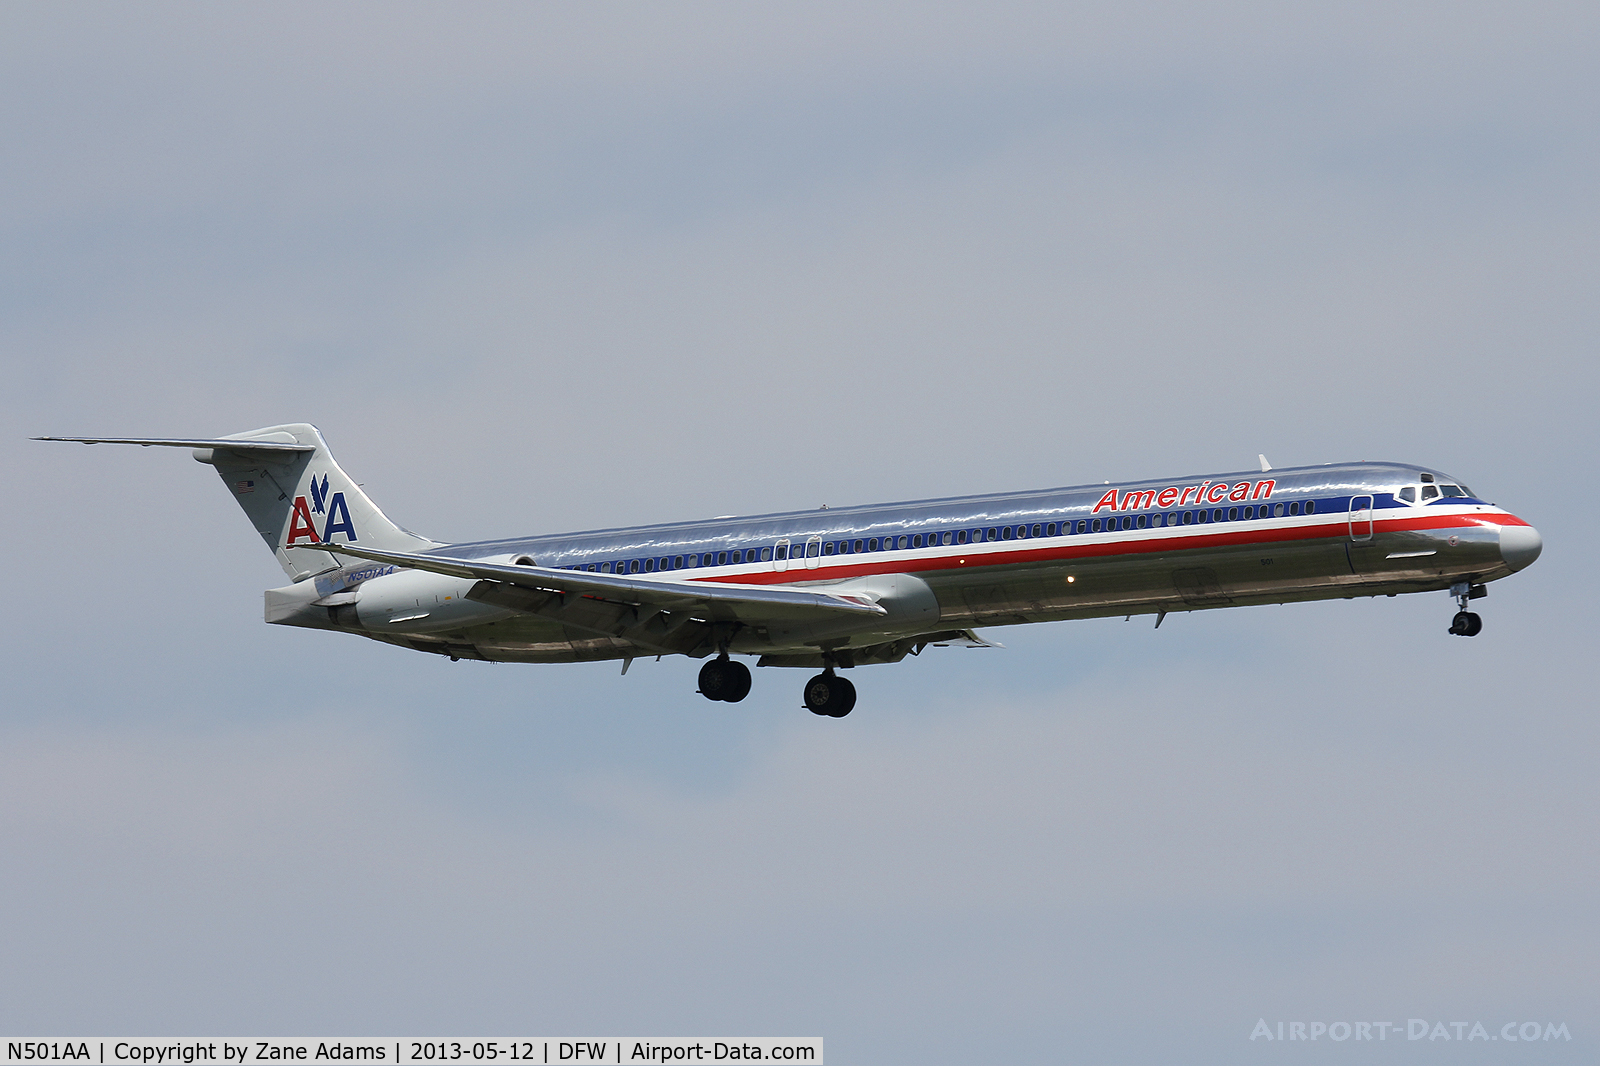 N501AA, 1989 McDonnell Douglas MD-82 (DC-9-82) C/N 49738, American Airlines at DFW Airport